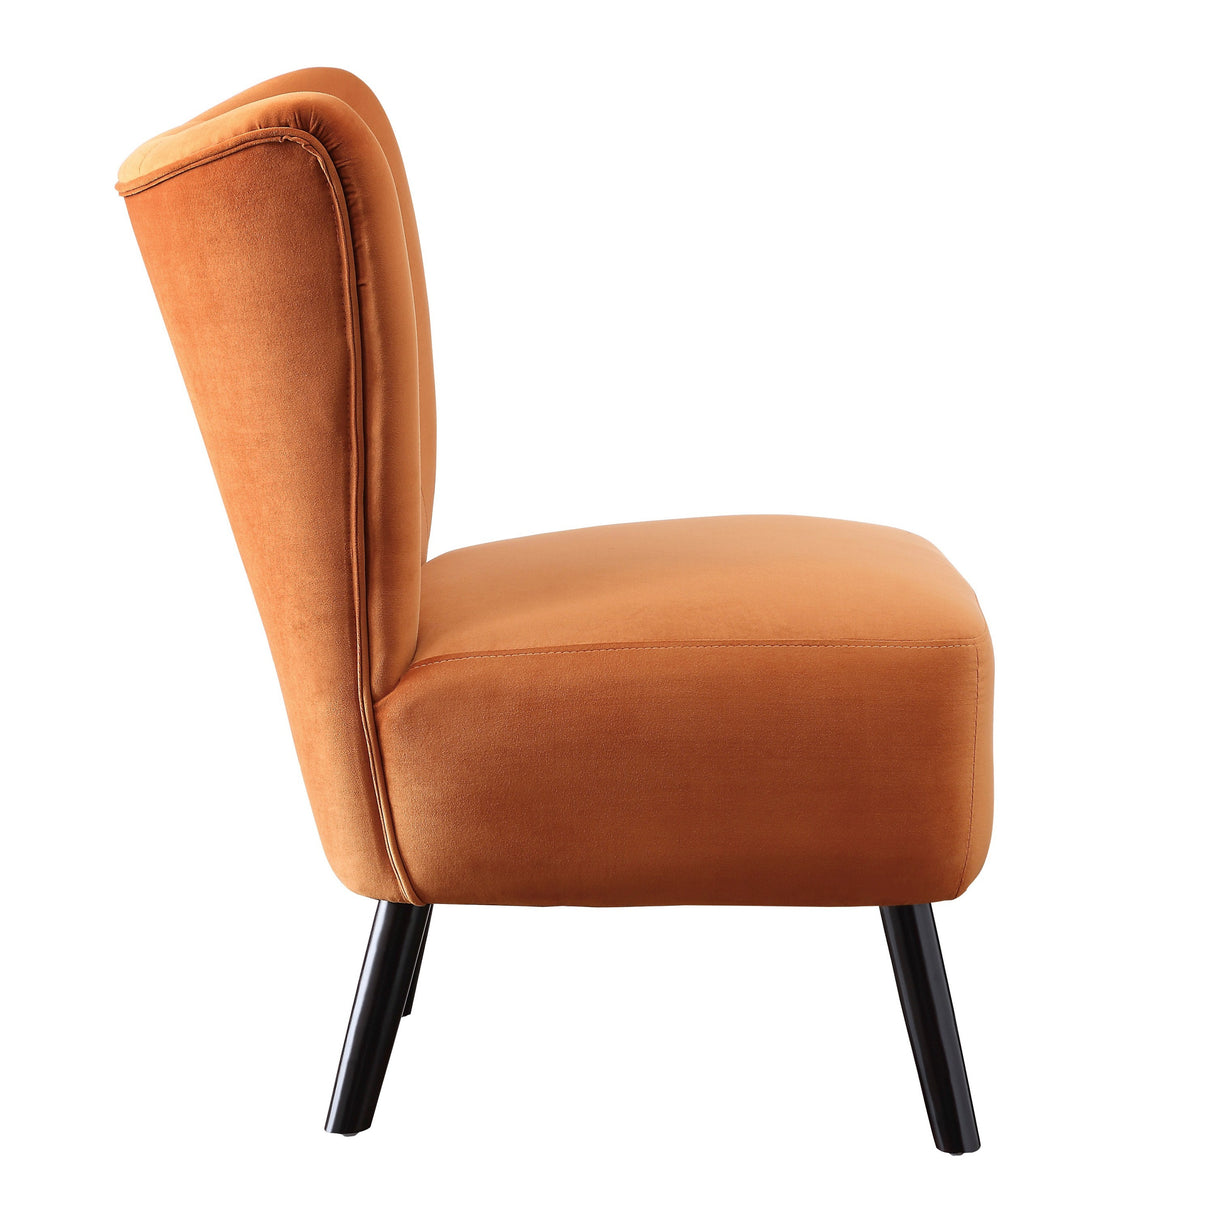 Unique Style Orange Velvet Covering Accent Chair Button-Tufted Back Brown Finish Wood Legs Modern Home Furniture - Home Elegance USA